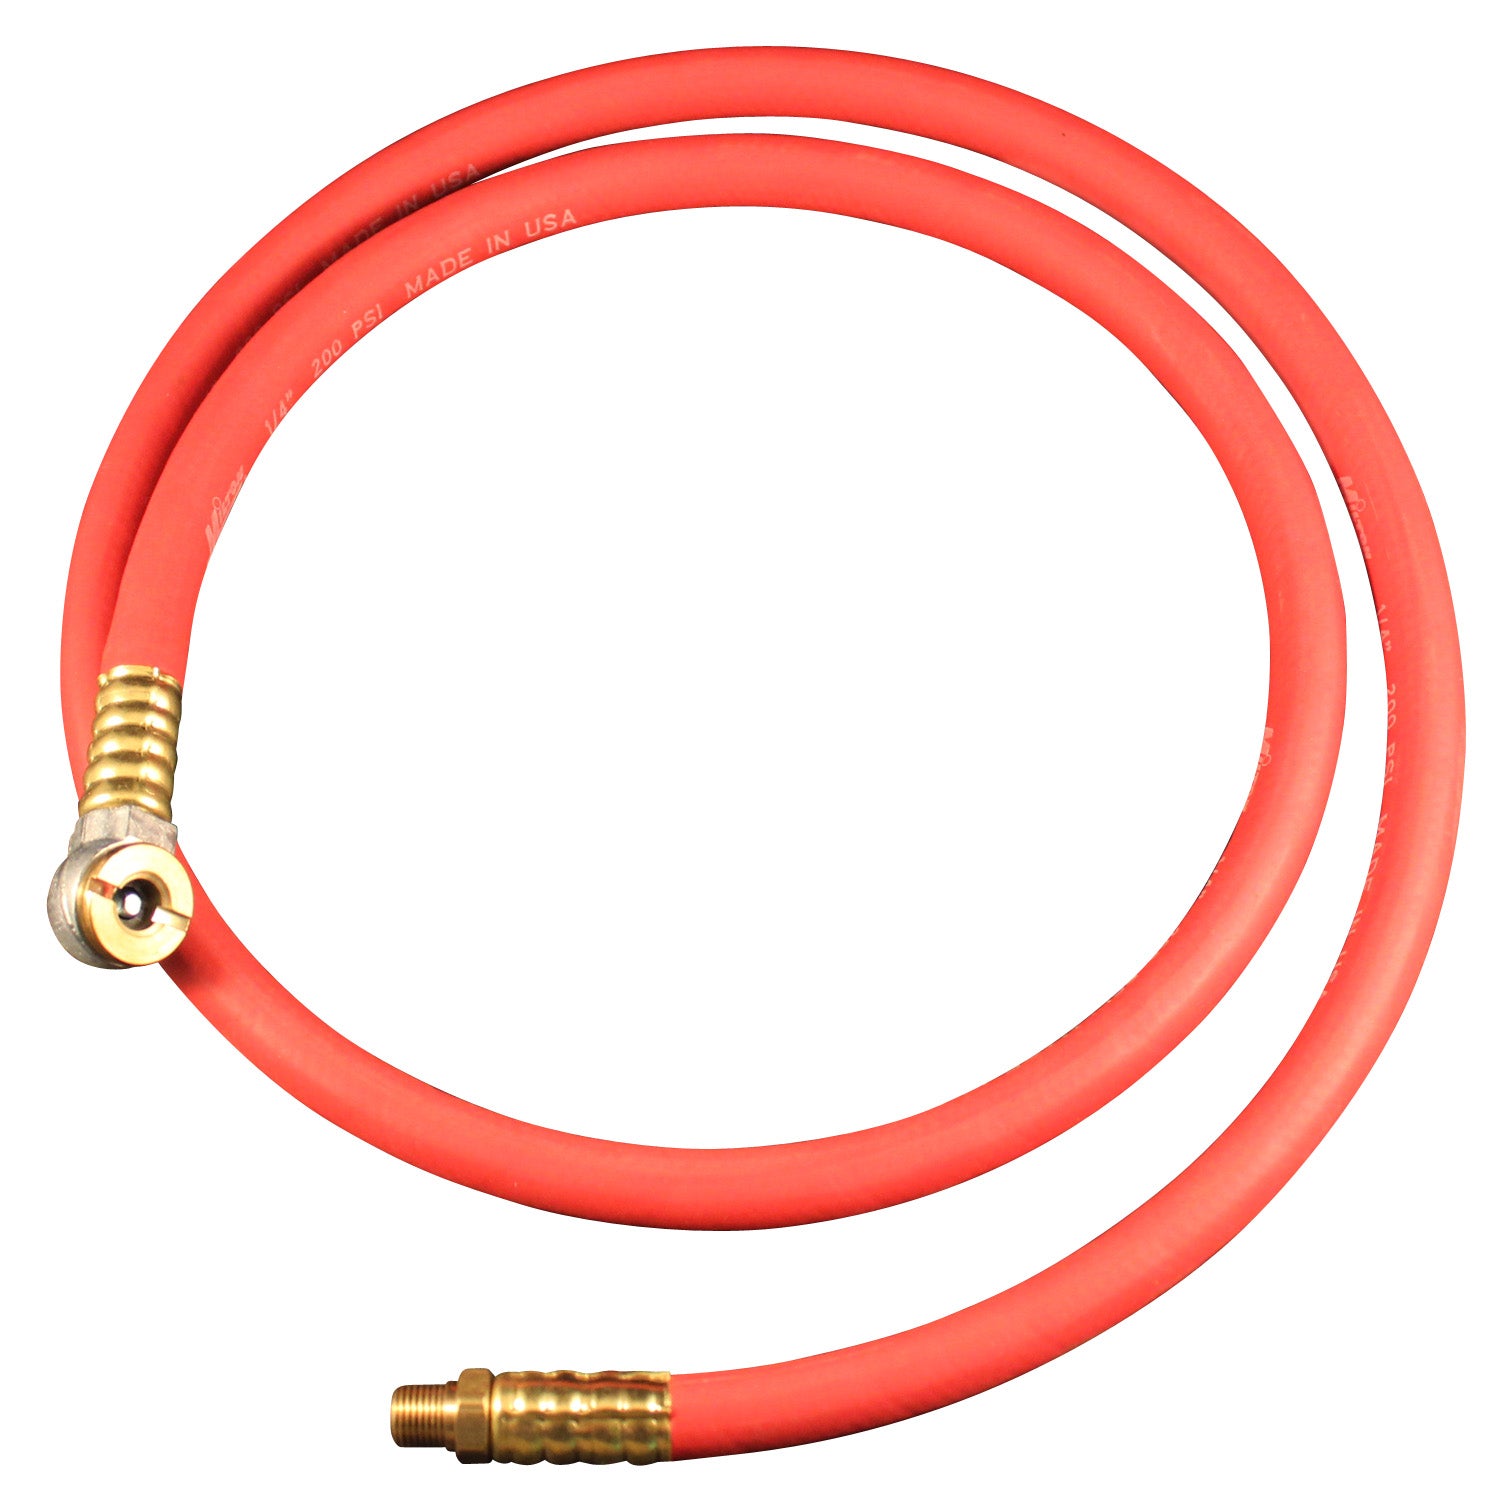 Air Hose, 4' Long, Replacement